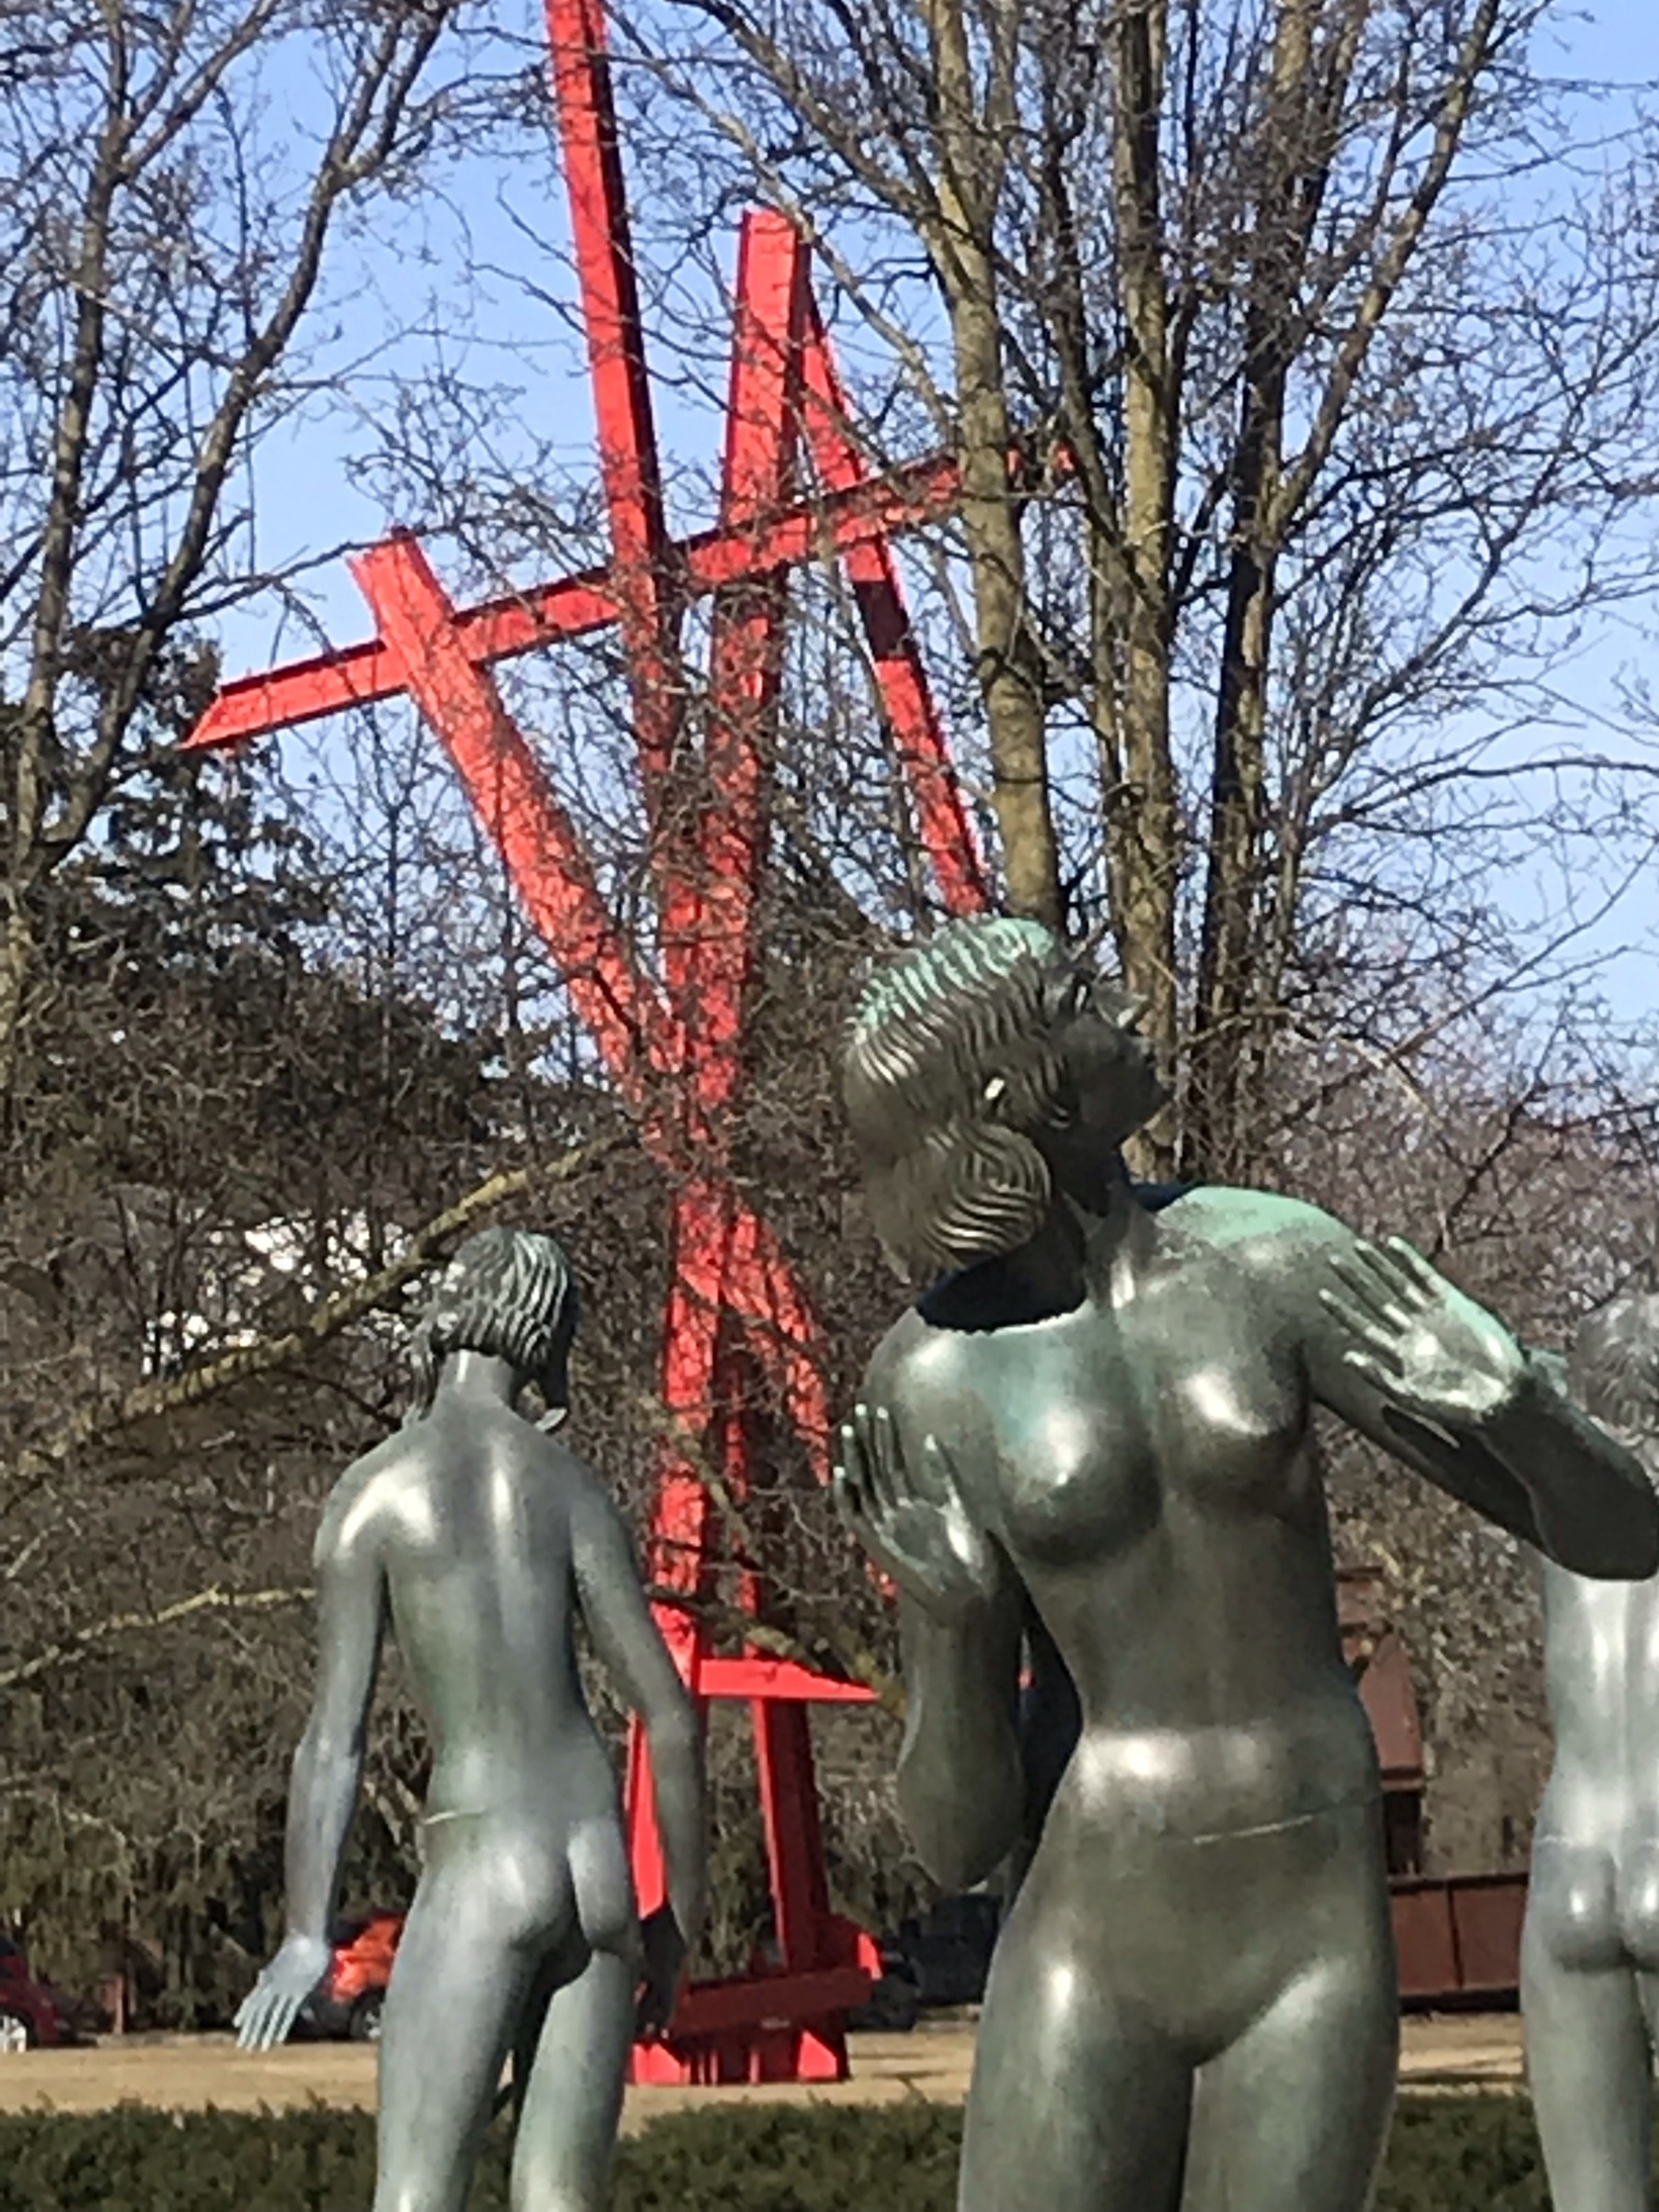 Modern meets traditional, sculptures by #CarlMilles and #MarkDiSuvero
#culture